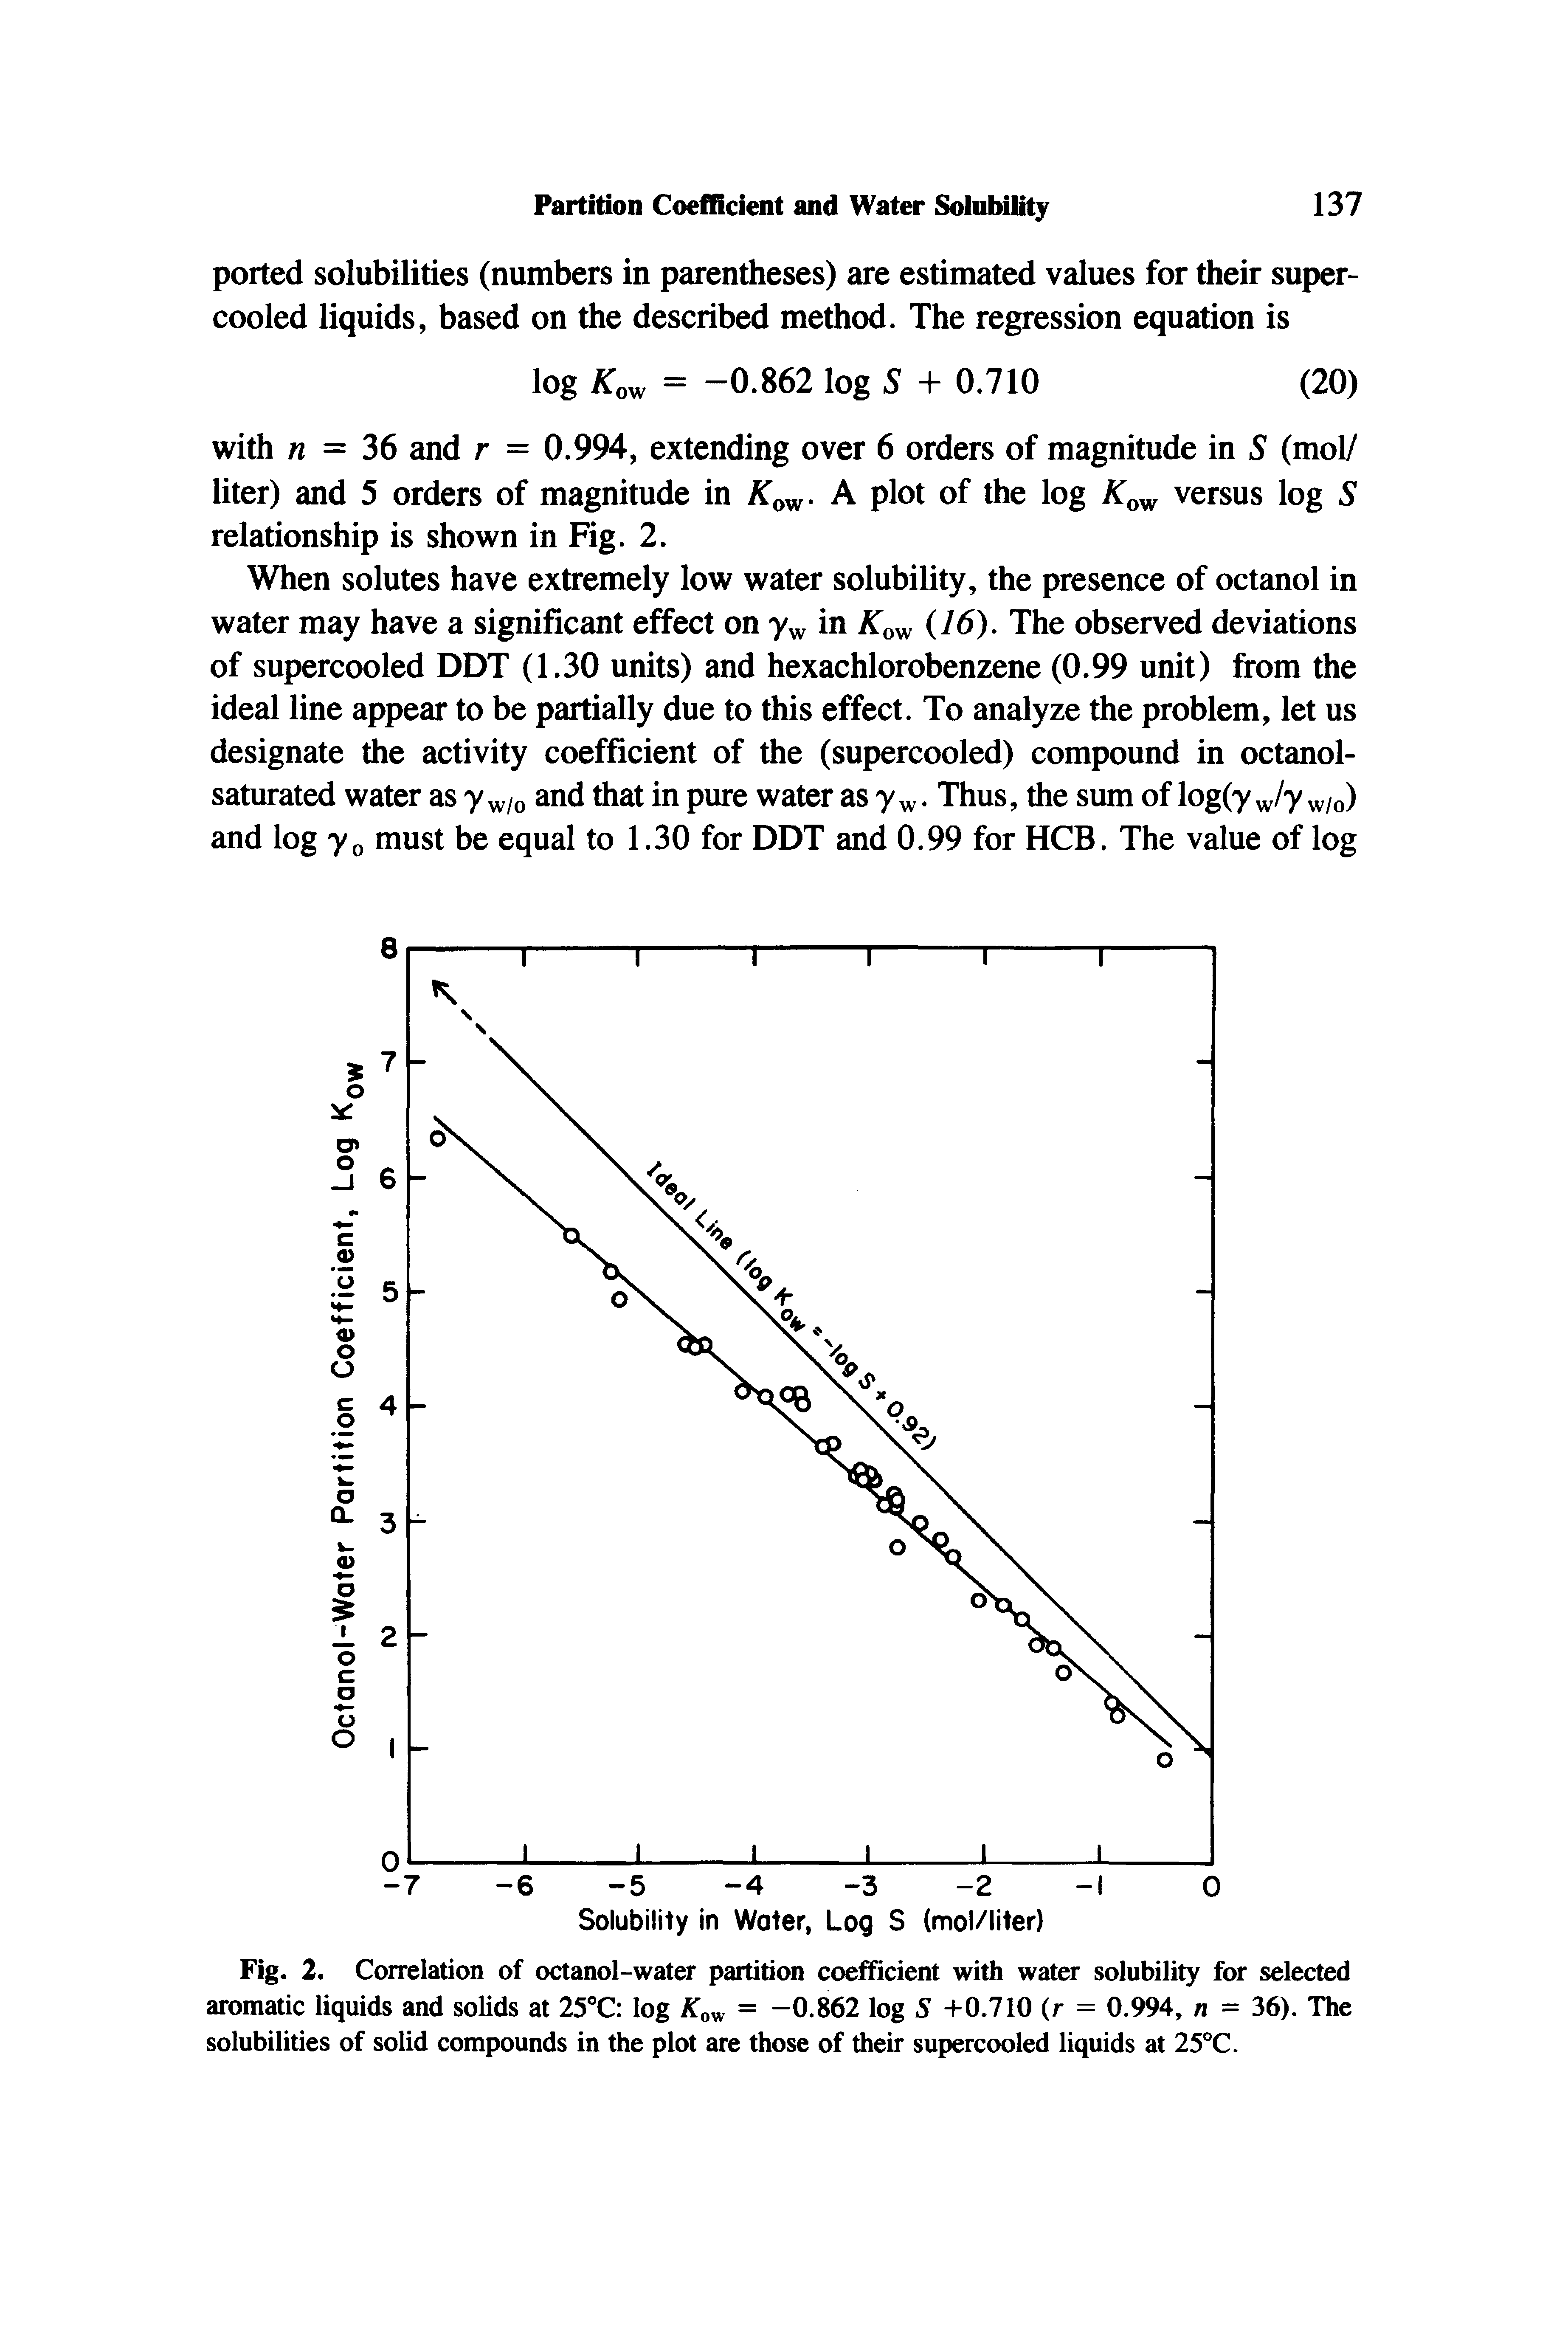 Fig. 2. Correlation of octanol-water partition coefficient with water solubility for selected aromatic liquids and solids at 25°C log A ow = -0.862 log S +0.710 (r = 0.994, n - 36). The solubilities of solid compounds in the plot are those of their supercooled liquids at 25°C.